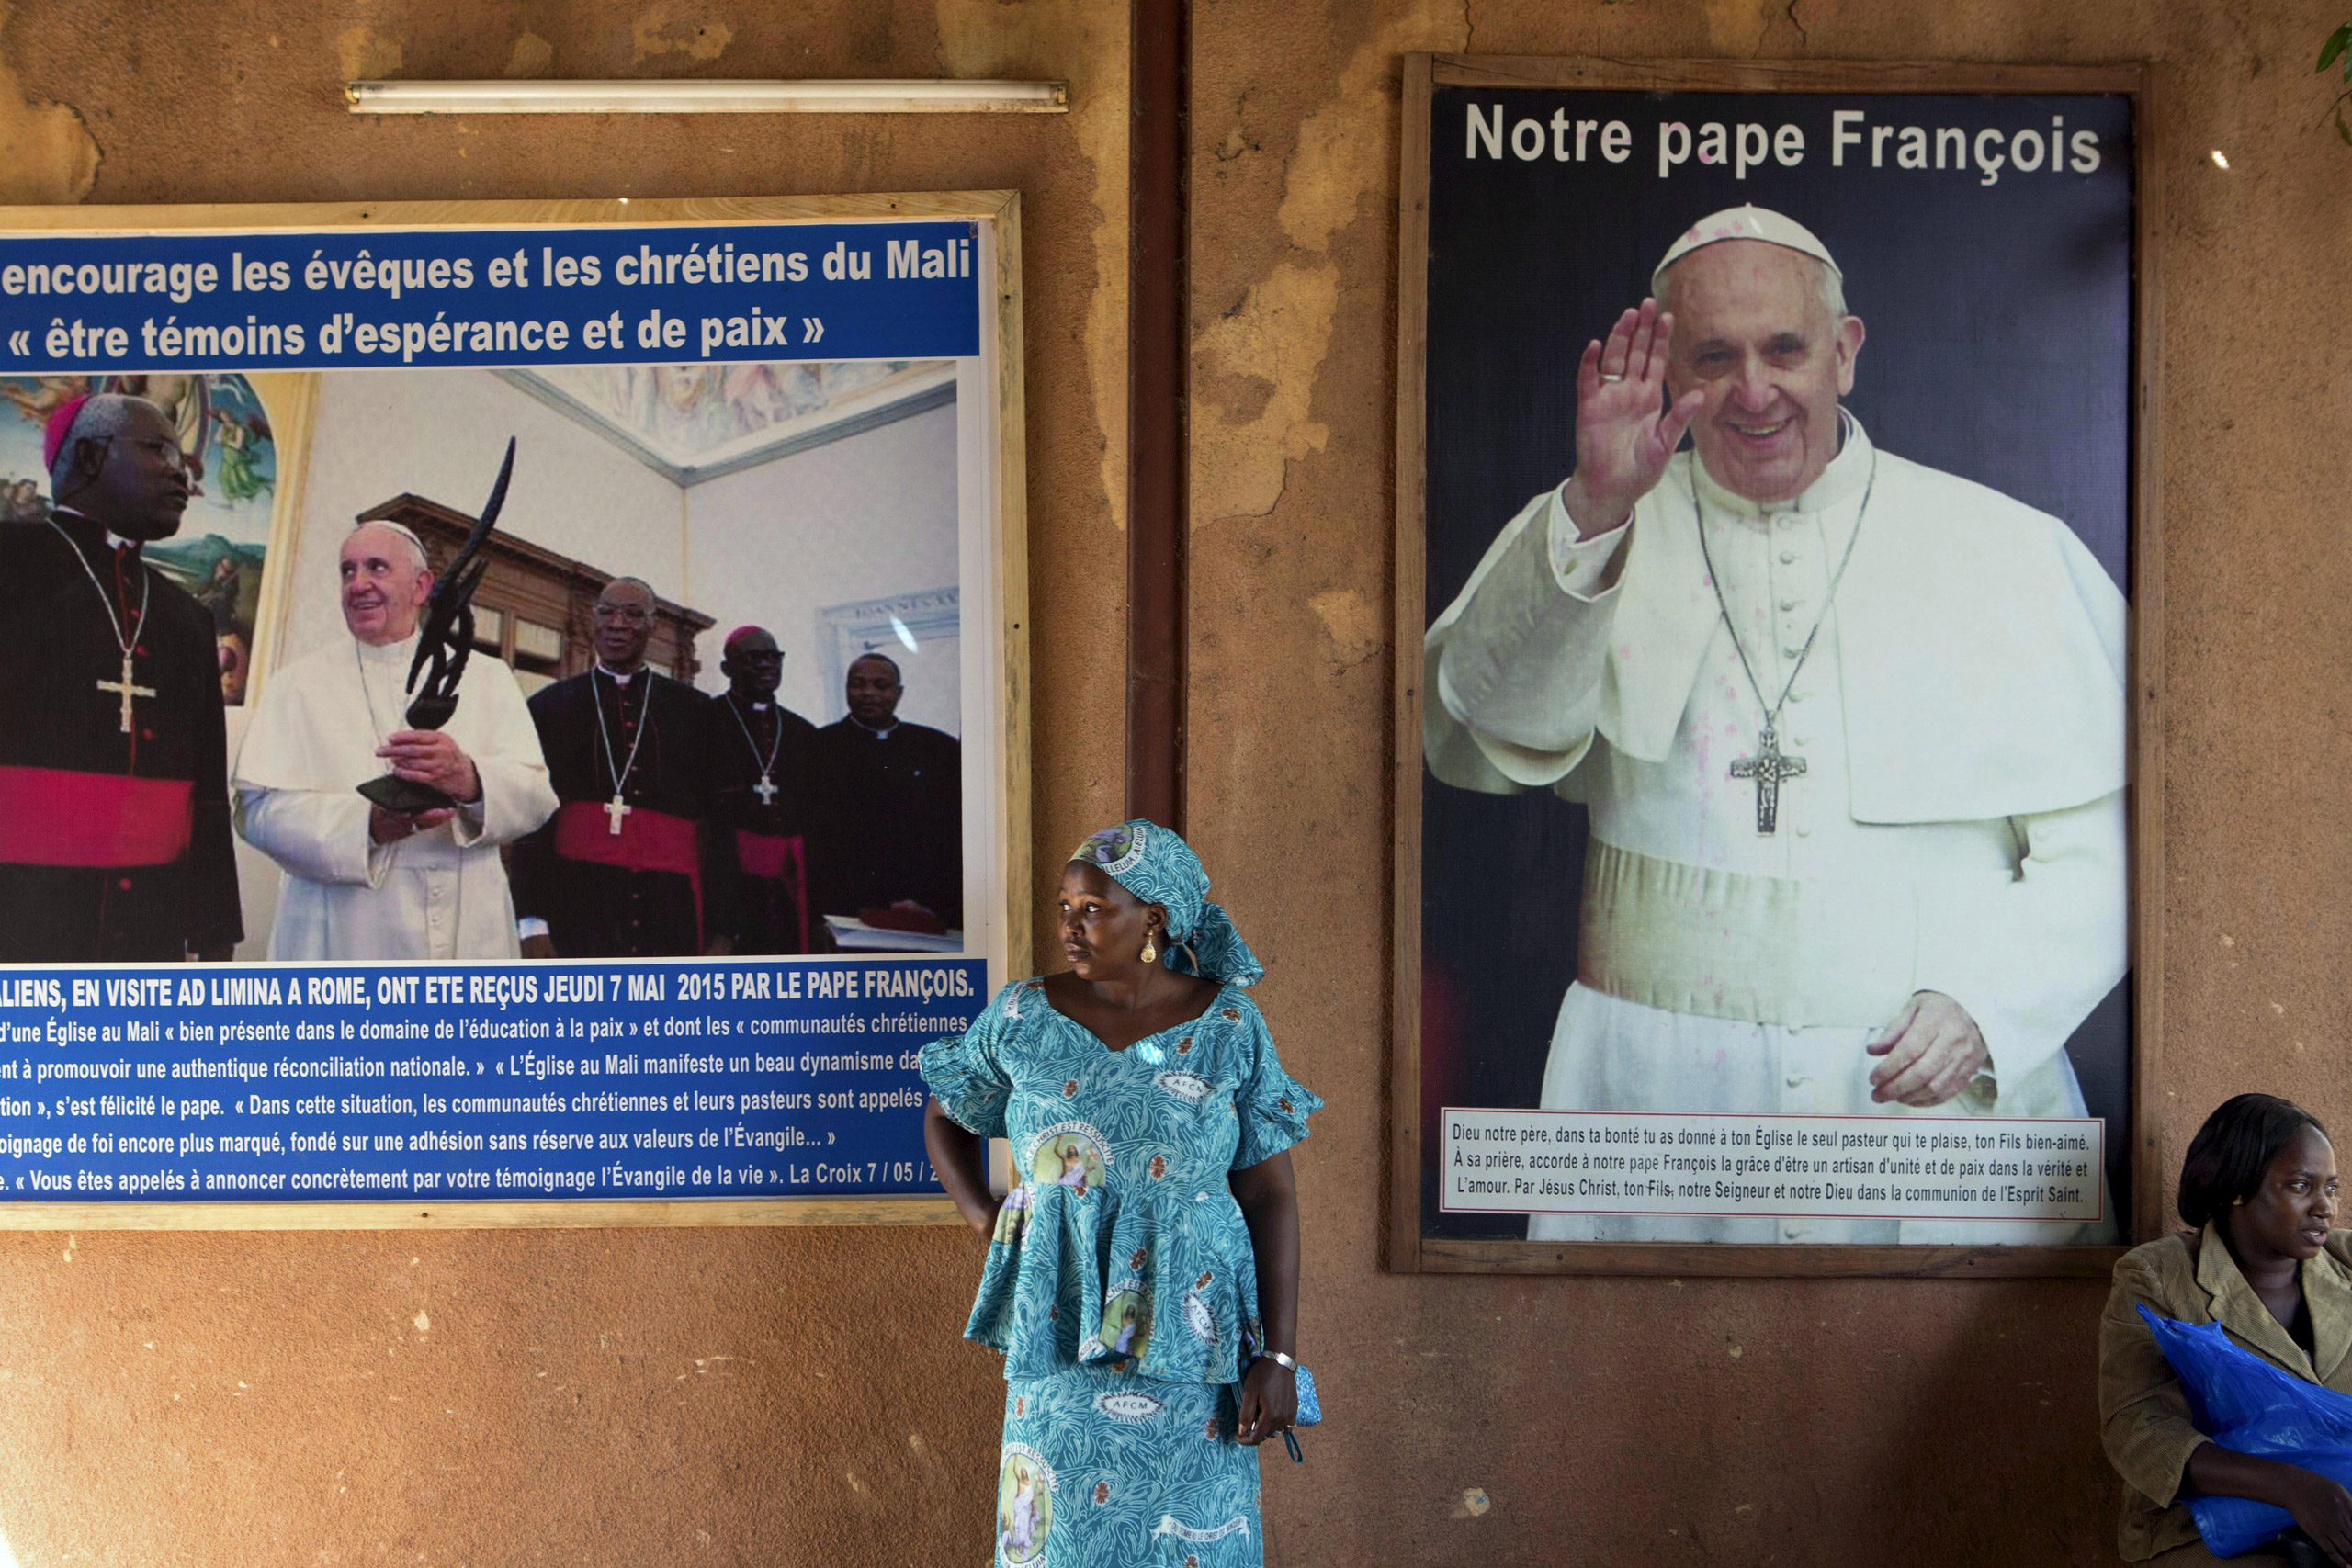 A woman stands in front of posters of Pope Francis at the Martyrs of Uganda church in Bamako, Mali, November 8, 2015. The poster on the right reads, "Our Pope Francis". Pope Francis makes his first pontifical visit later this month to Africa, where Catholicism has grown rapidly over the last few decades but now faces serious competition from Evangelical and Pentecostal churches, as well as Islam. The pontiff's trip to Africa, where an estimated 1 in 5 people is Catholic, takes in Kenya, Uganda and Central African Republic. His visit to that country is fraught with security concerns after months of clashes between Christians and Muslim gangs in which dozens of people have been killed.  REUTERS/Joe PenneyPICTURE 6 OF 13 FOR WIDER IMAGE STORY "CATHOLICISM IN AFRICA". SEARCH "PONTIFF EVANGELICAL" FOR ALL IMAGES   - RTS82NC